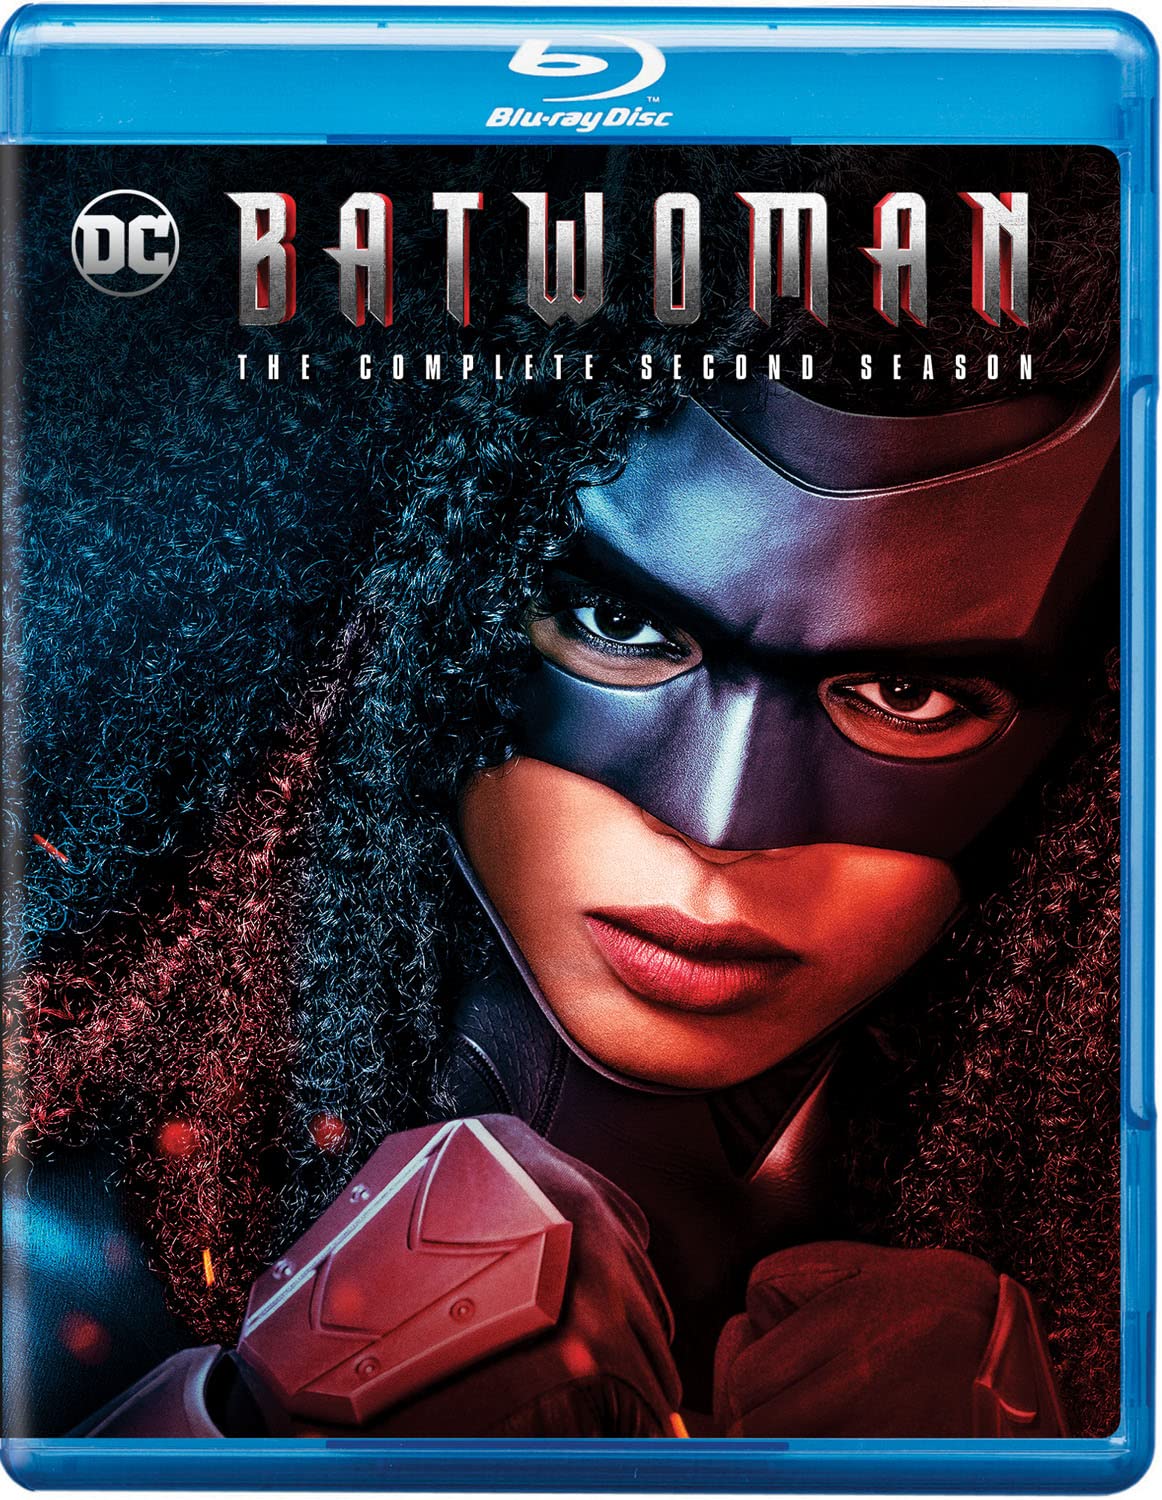 Batwoman: The Complete Second Season (Box Set) - Blu-ray [ 2021 ]  - Drama Television On Blu-ray - TV Shows On GRUV